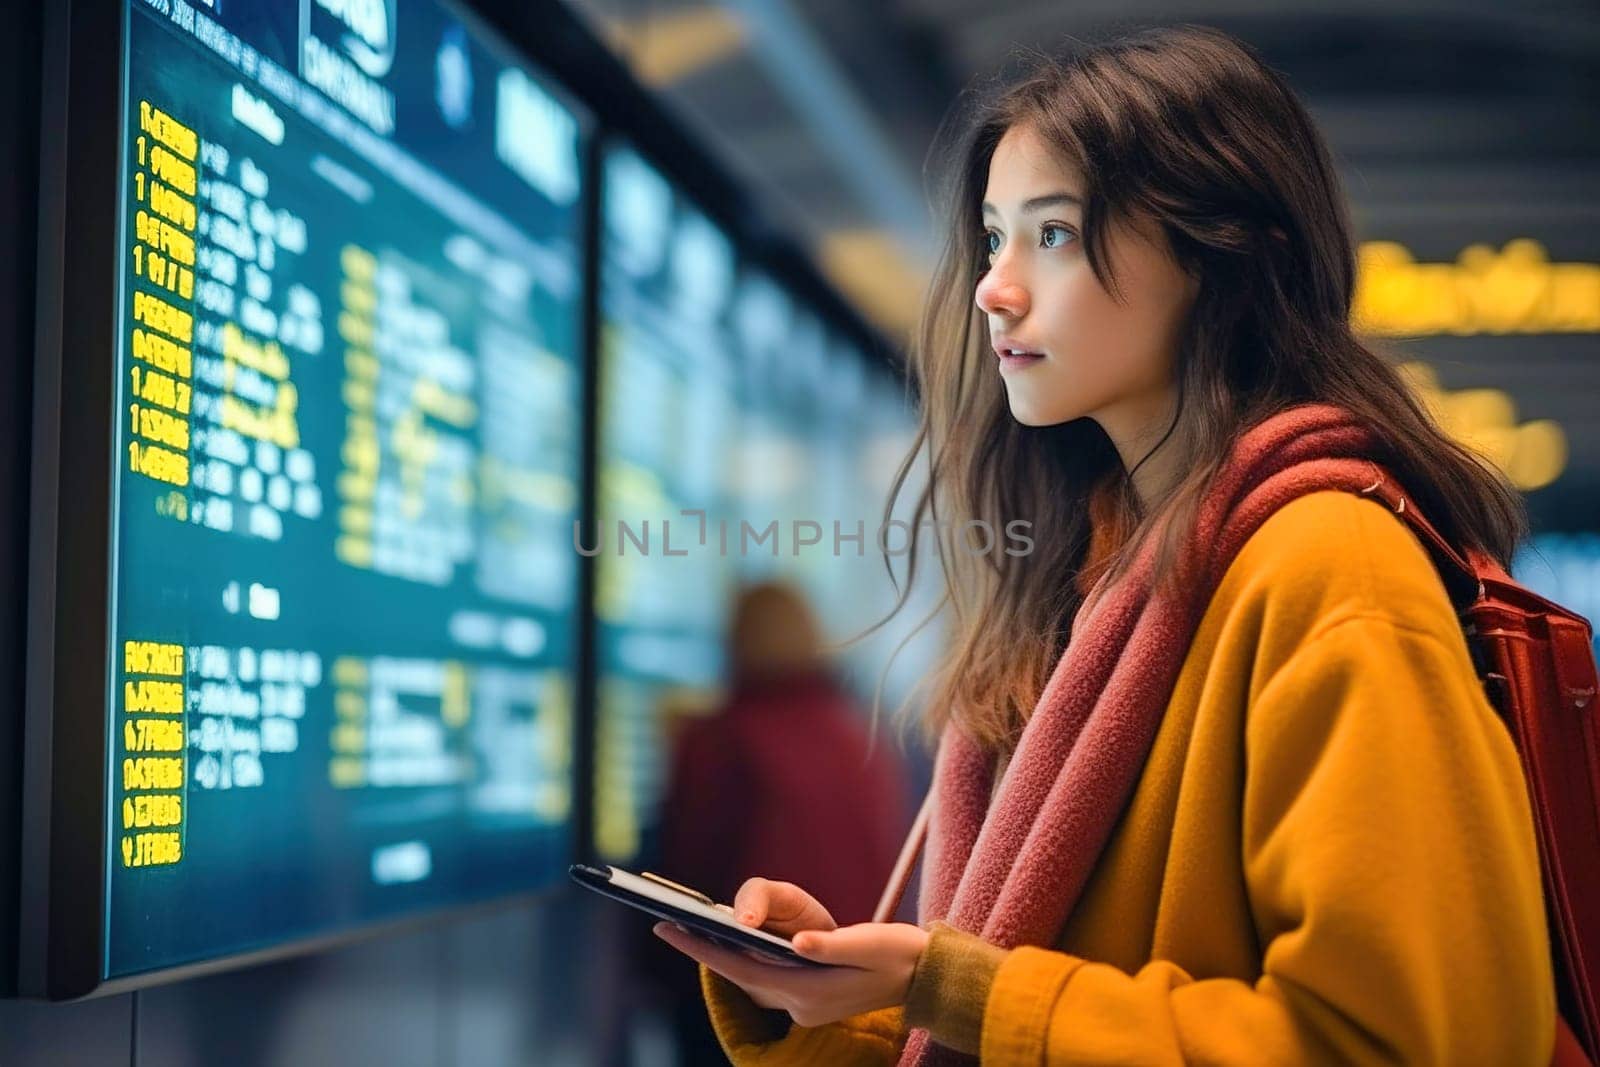 A woman with luggage looks at the airplane schedule board at the airport. by Yurich32